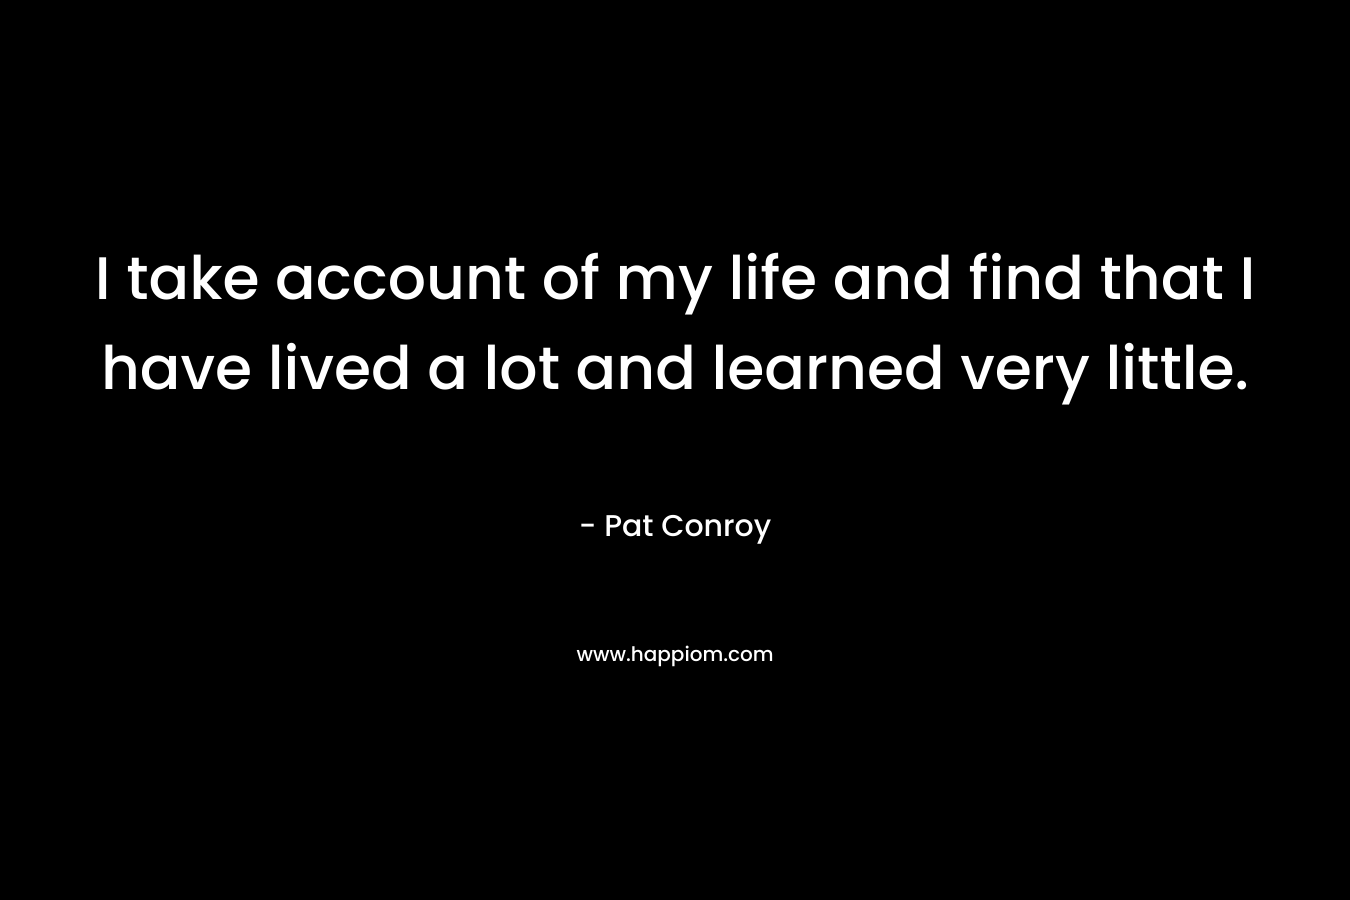 I take account of my life and find that I have lived a lot and learned very little.